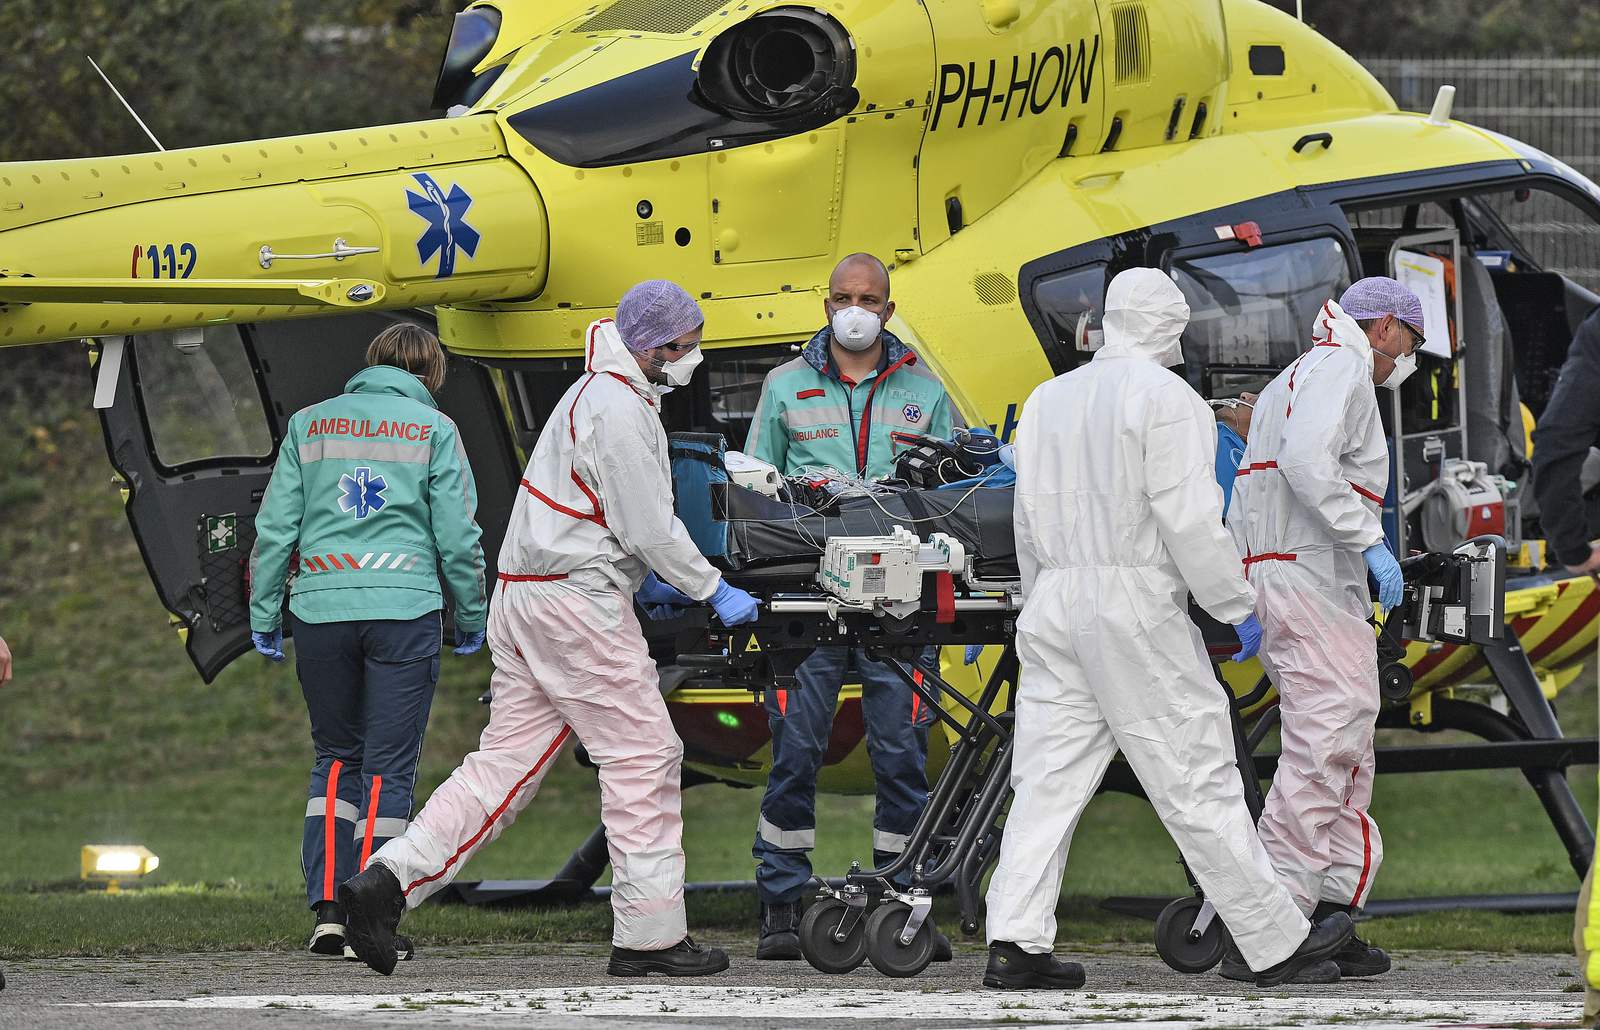 Dutch hospital airlifts patients to Germany amid virus surge